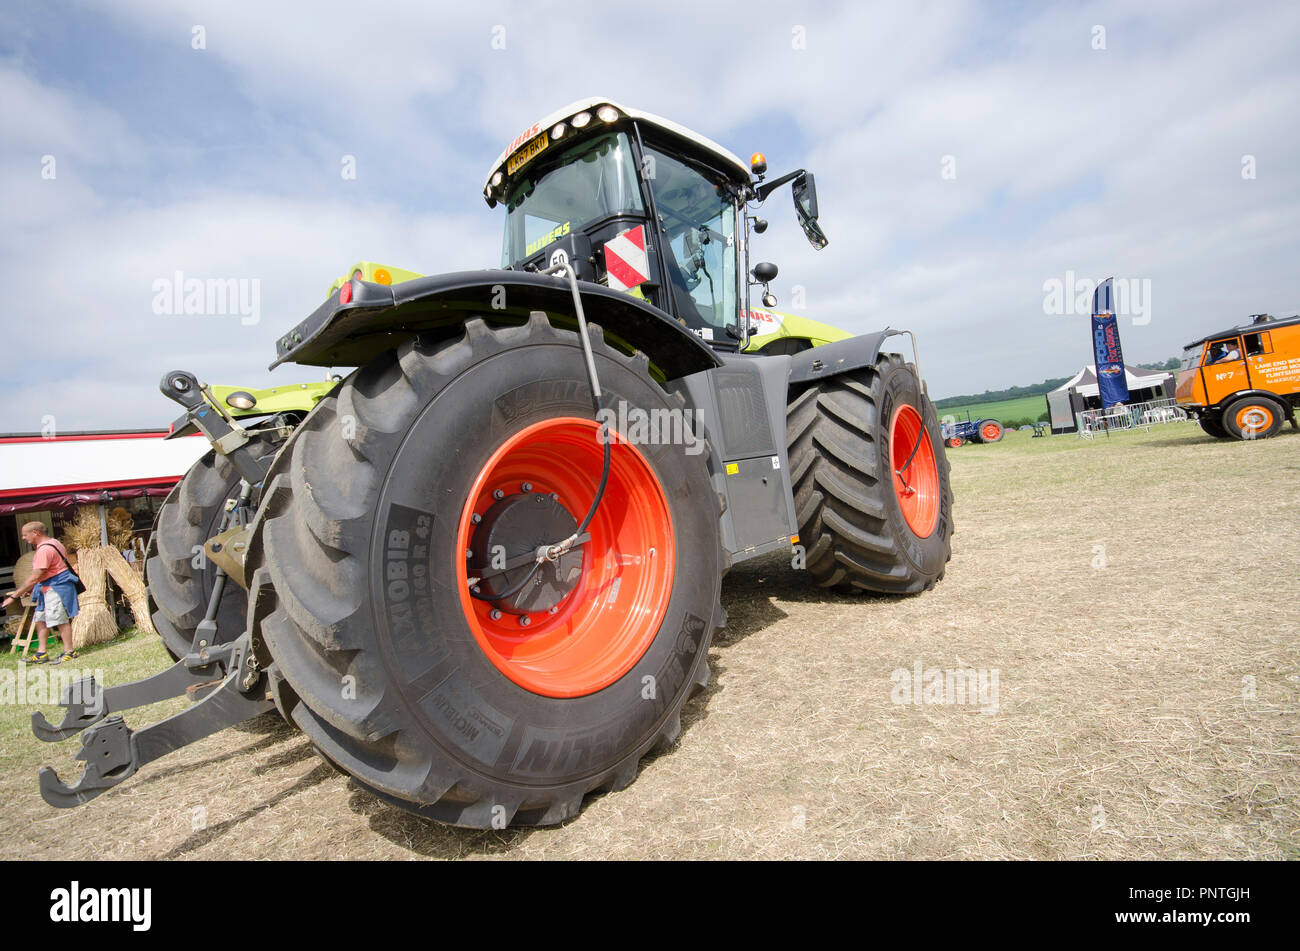 Steam Fayre Event in Hertfordshire, display of Tractors and Steam Engines held annually and open to Public viewing. Stock Photo